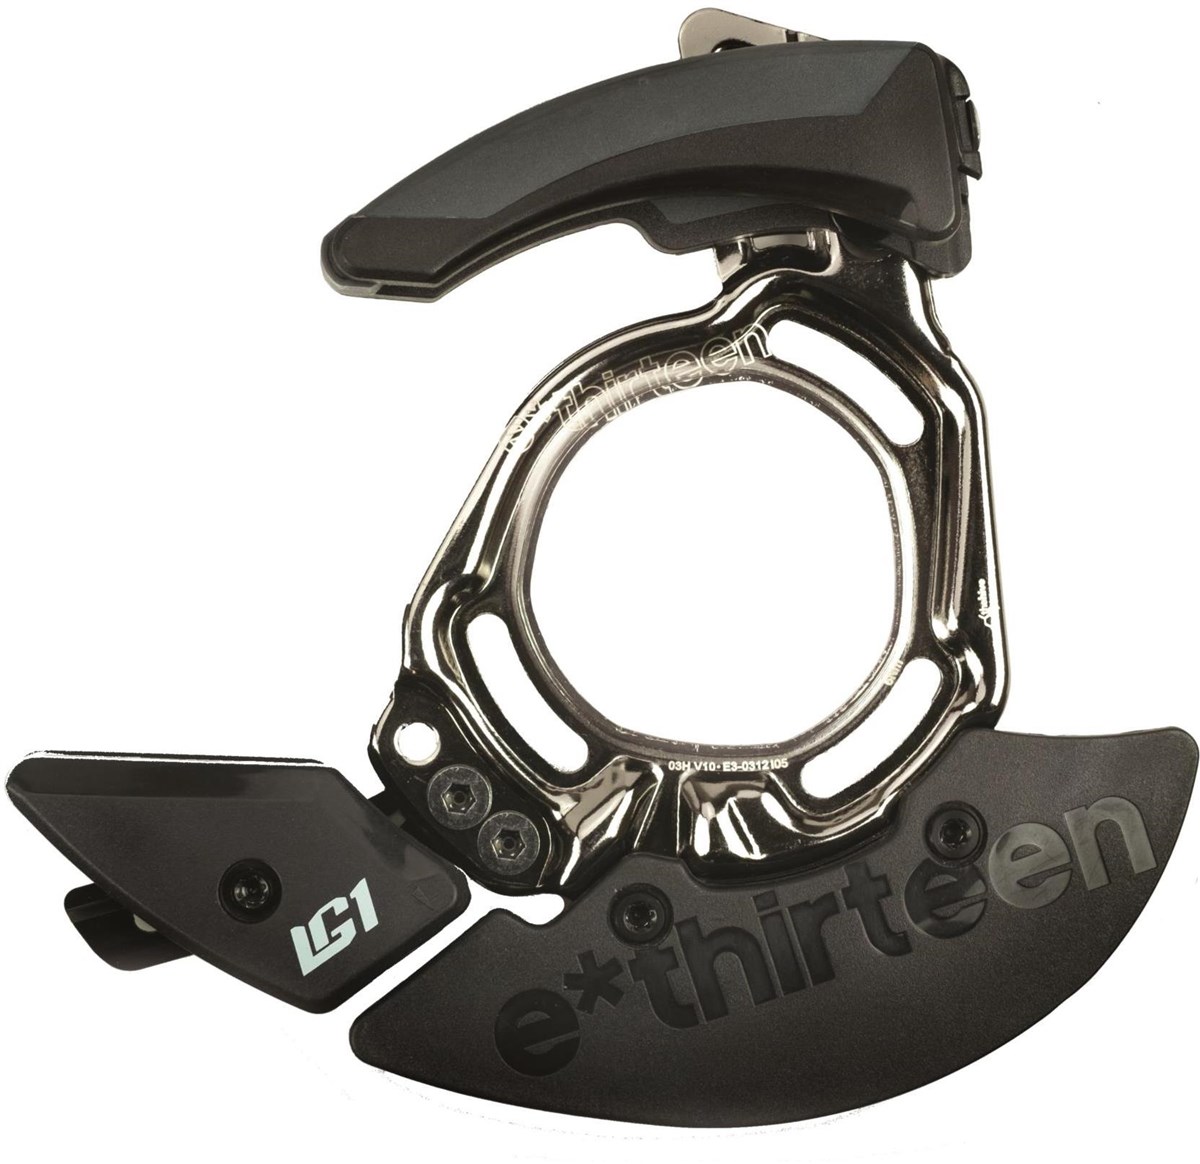 E-Thirteen LG1 Chain Guide product image